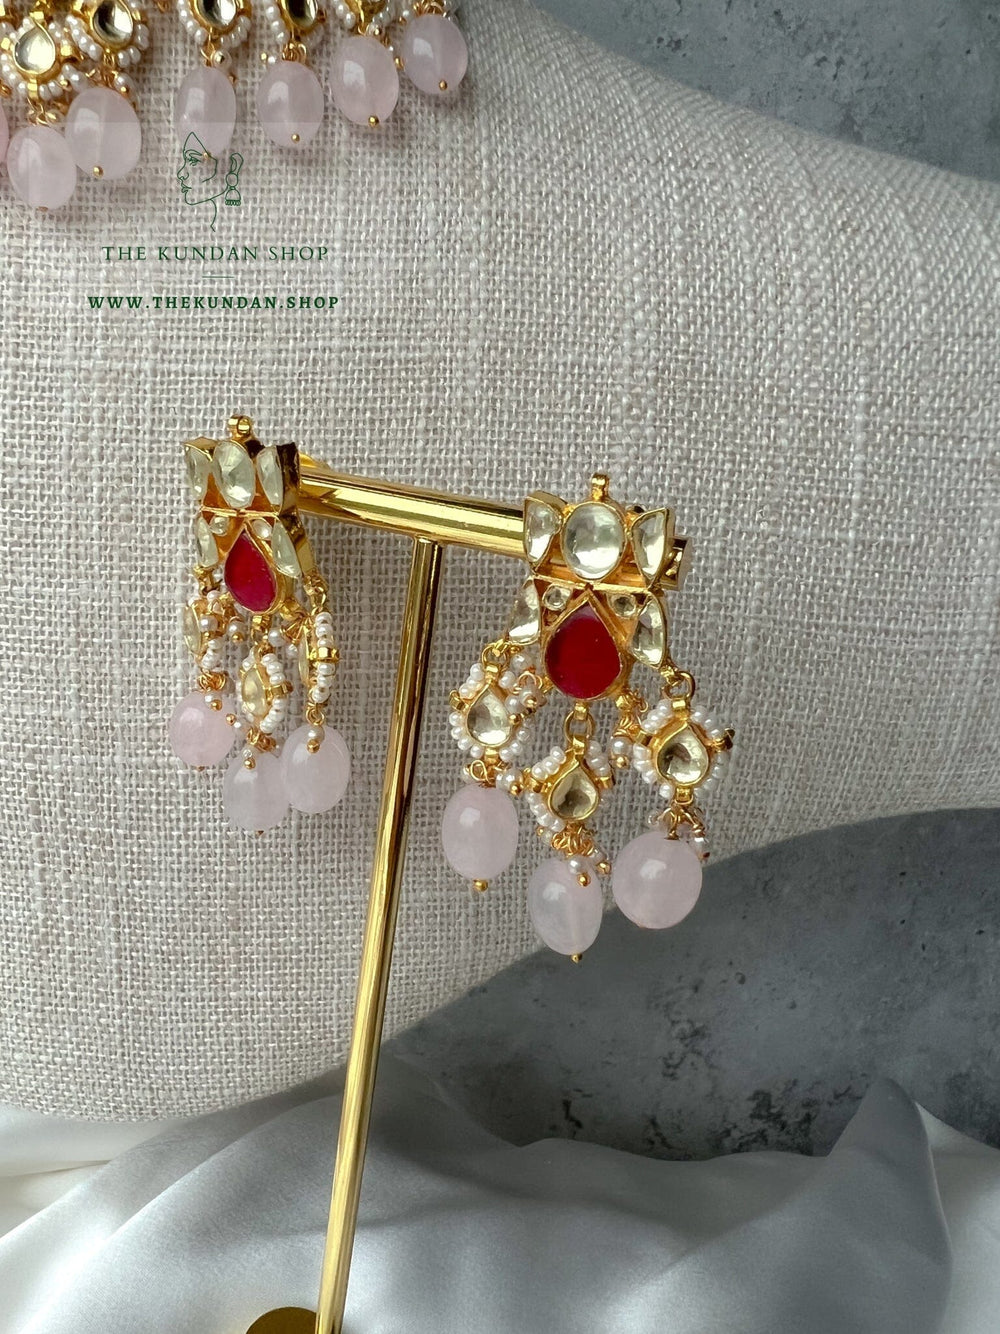 Sweetheart in Pinks Necklace Sets THE KUNDAN SHOP 